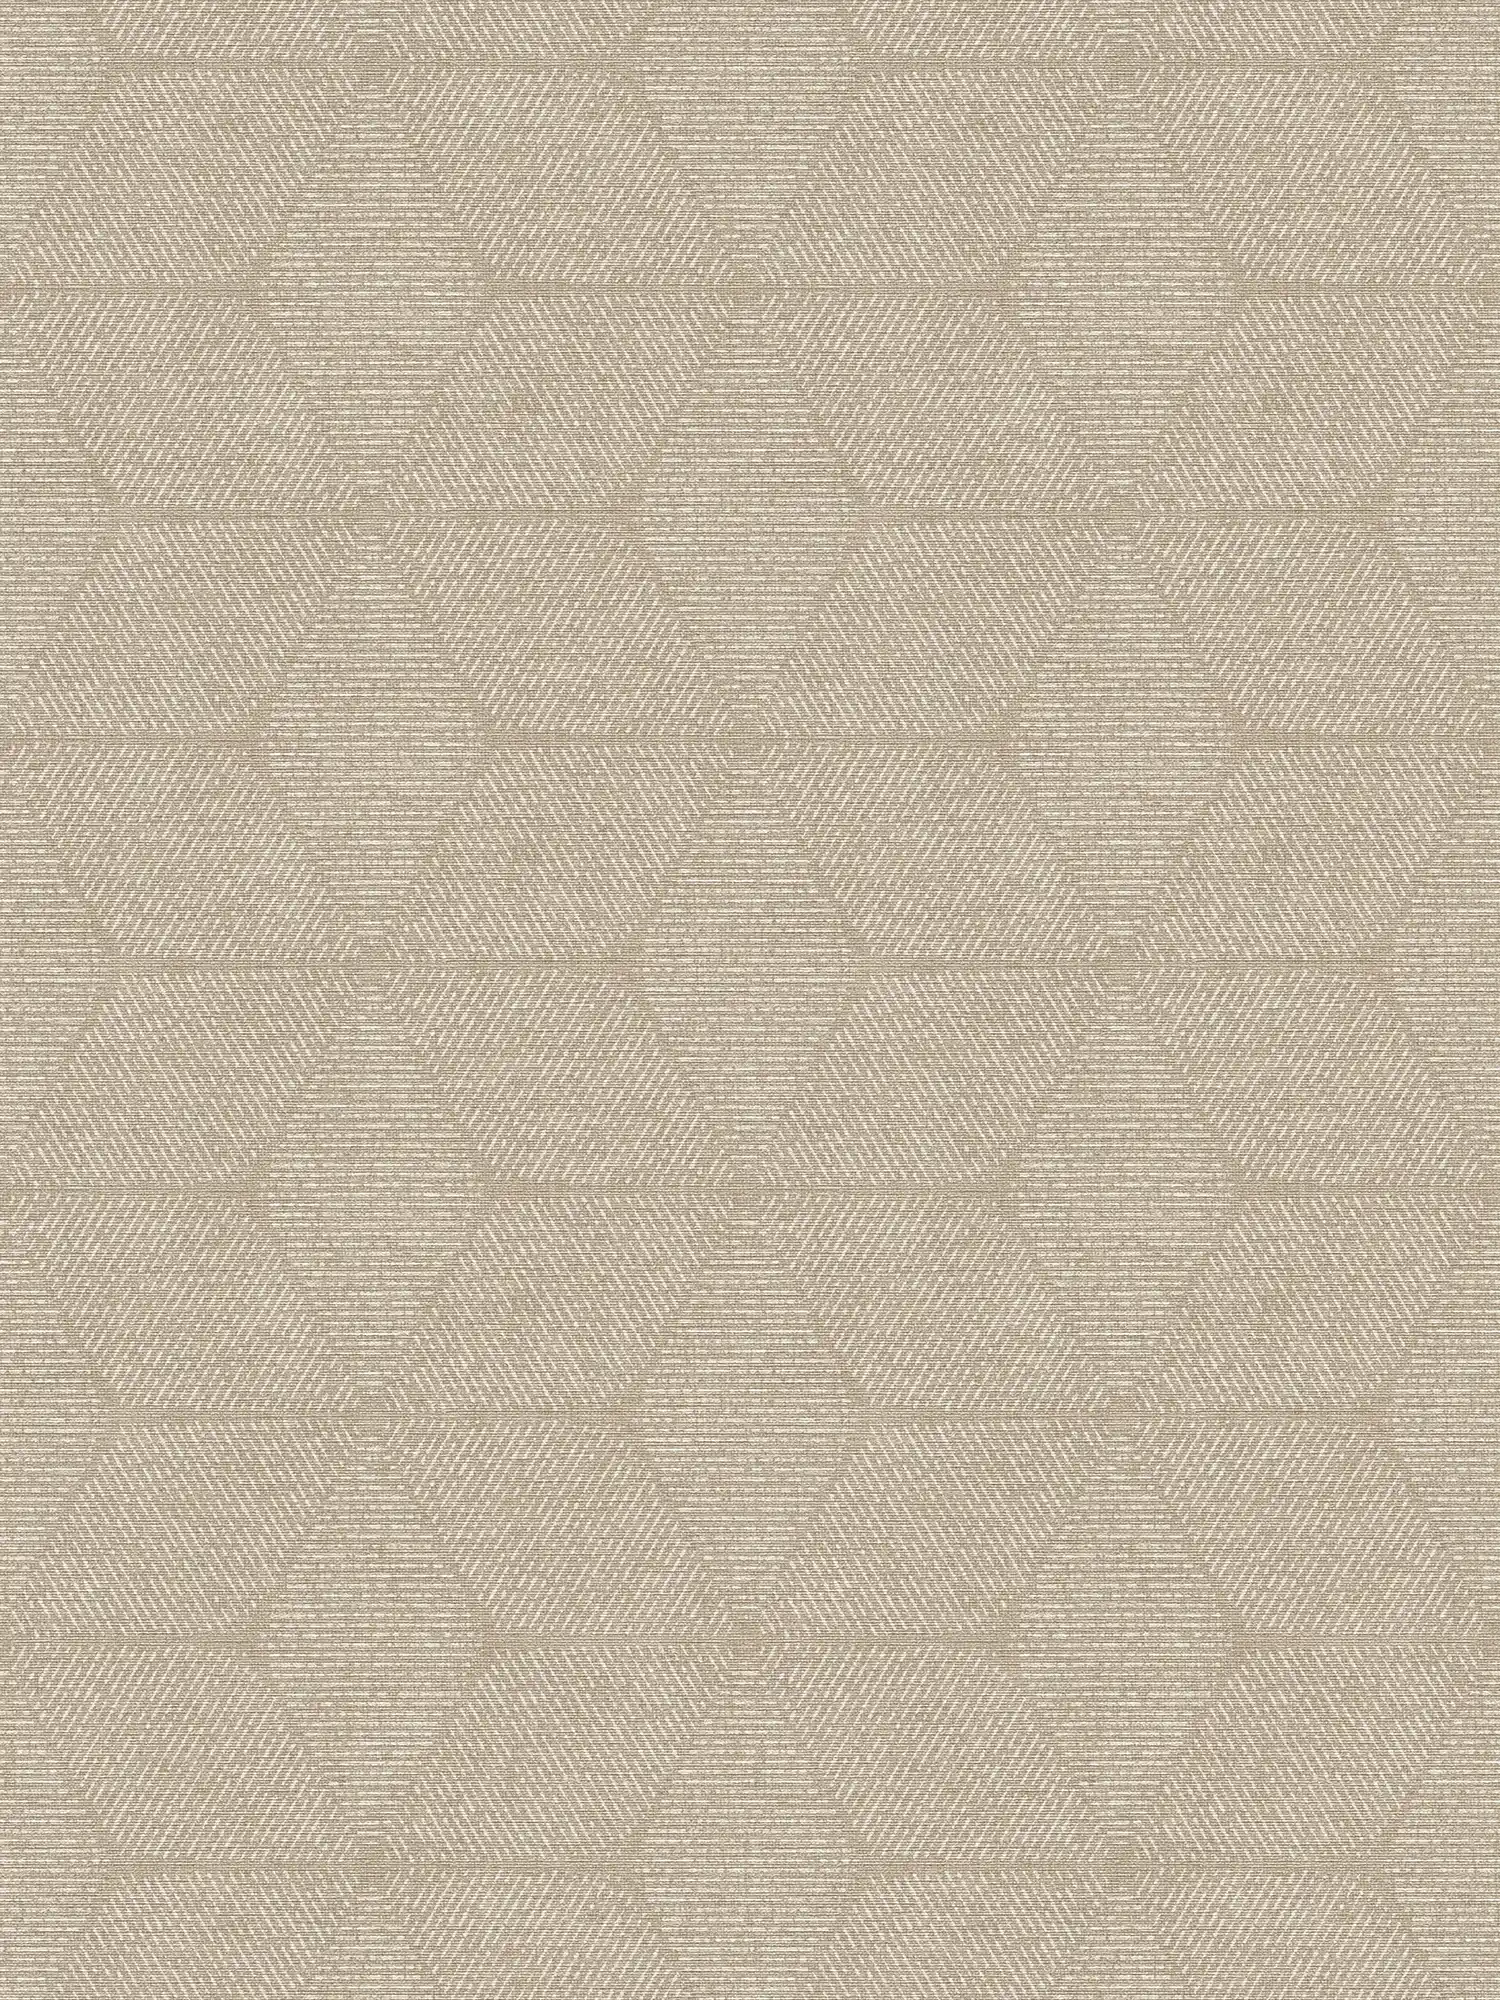         Non-woven wallpaper in natural style - beige, white
    